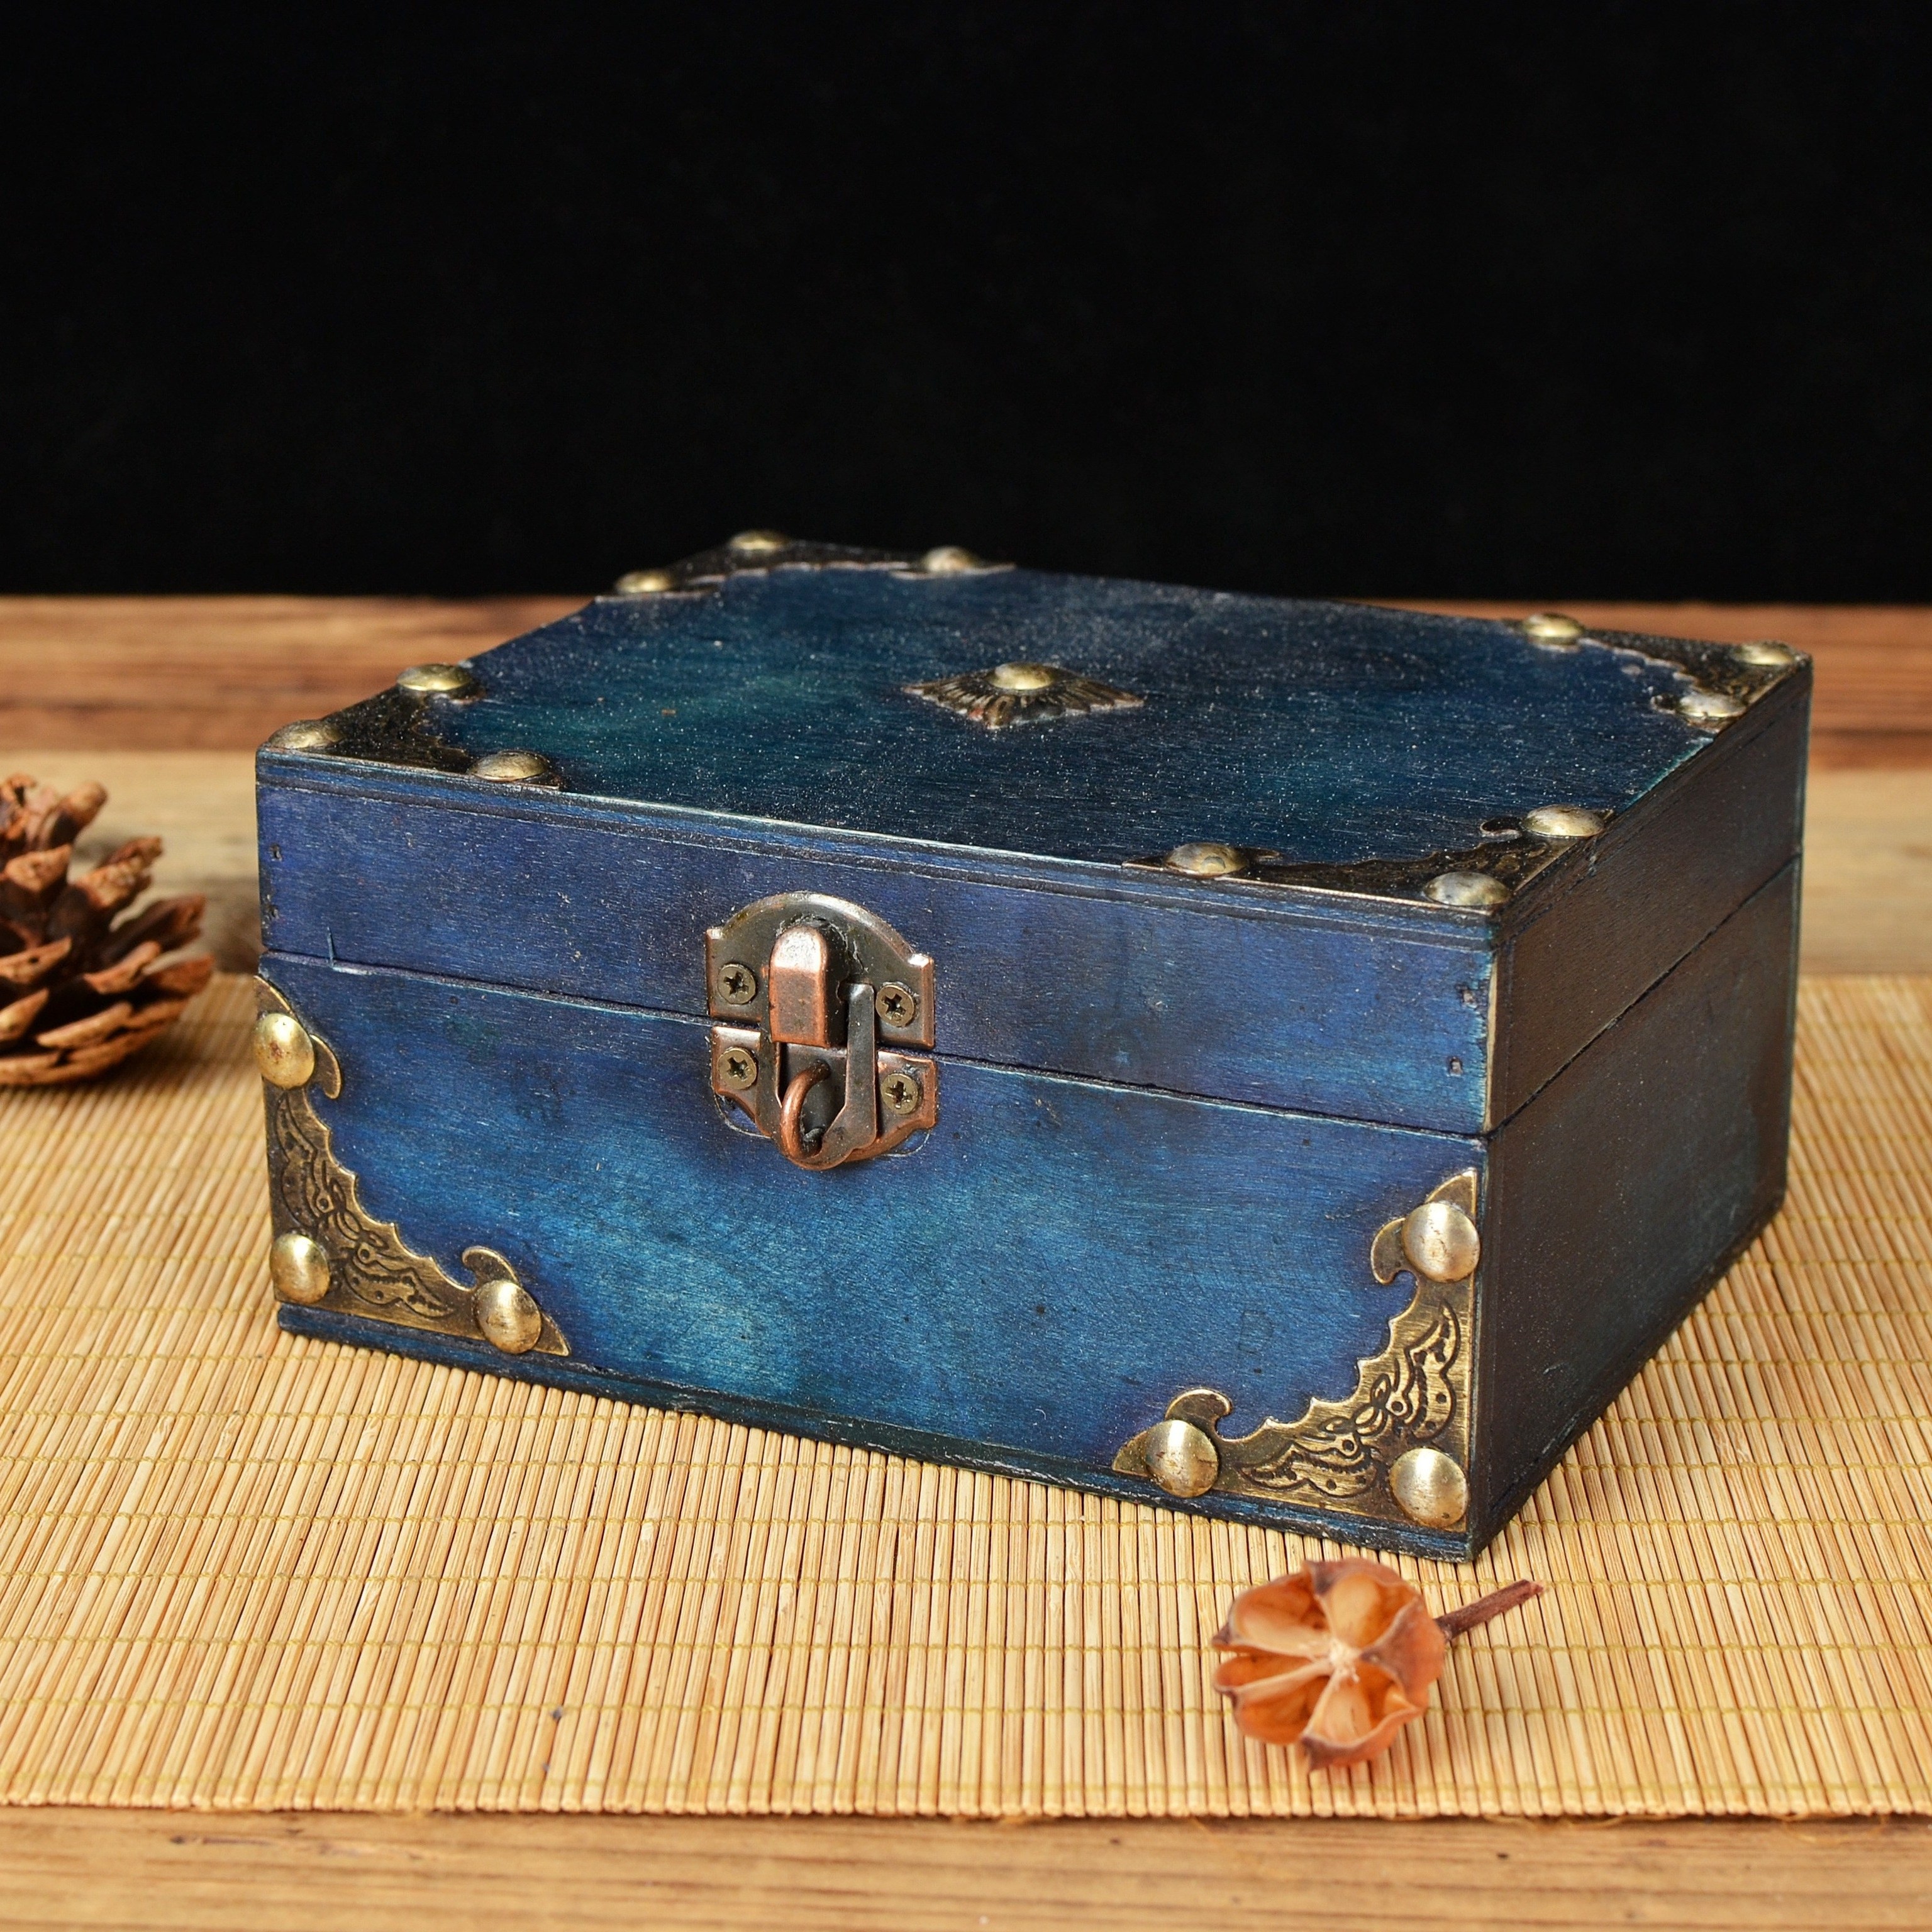 

1pc Vintage Wooden , Storage Box, Decorative Retro Style Luggage, For Jewelry Keepsake, Home Decor, New Year Gift, Gift For Men, Gift For Women Wood, Made Jewelry Pearl Storage Box Trinket